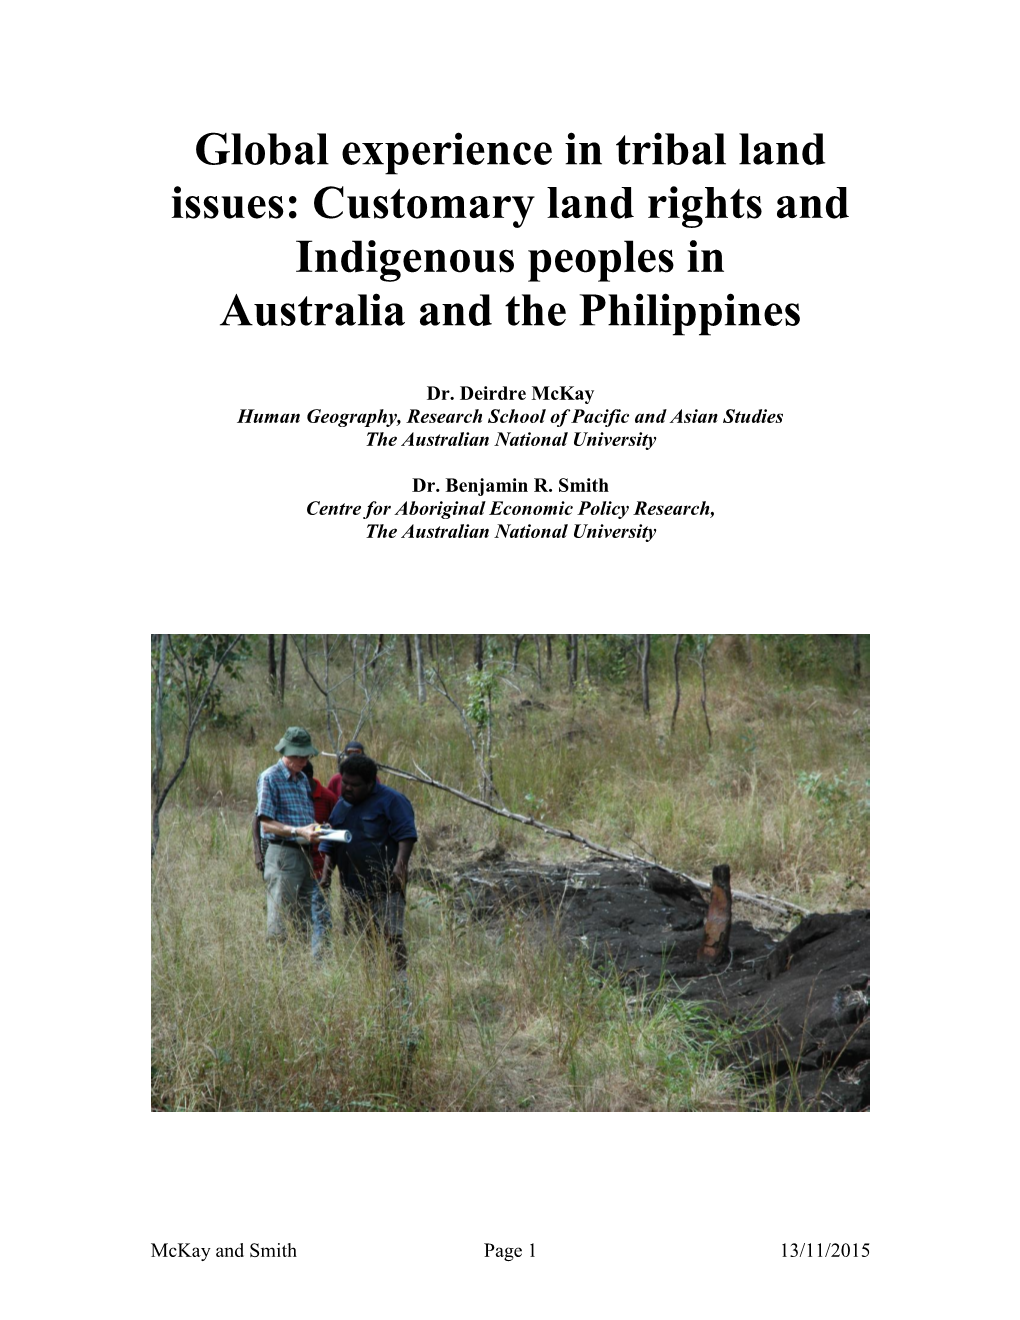 Customary Land Rights and Indigenous Peoples in Australia and the Philippines